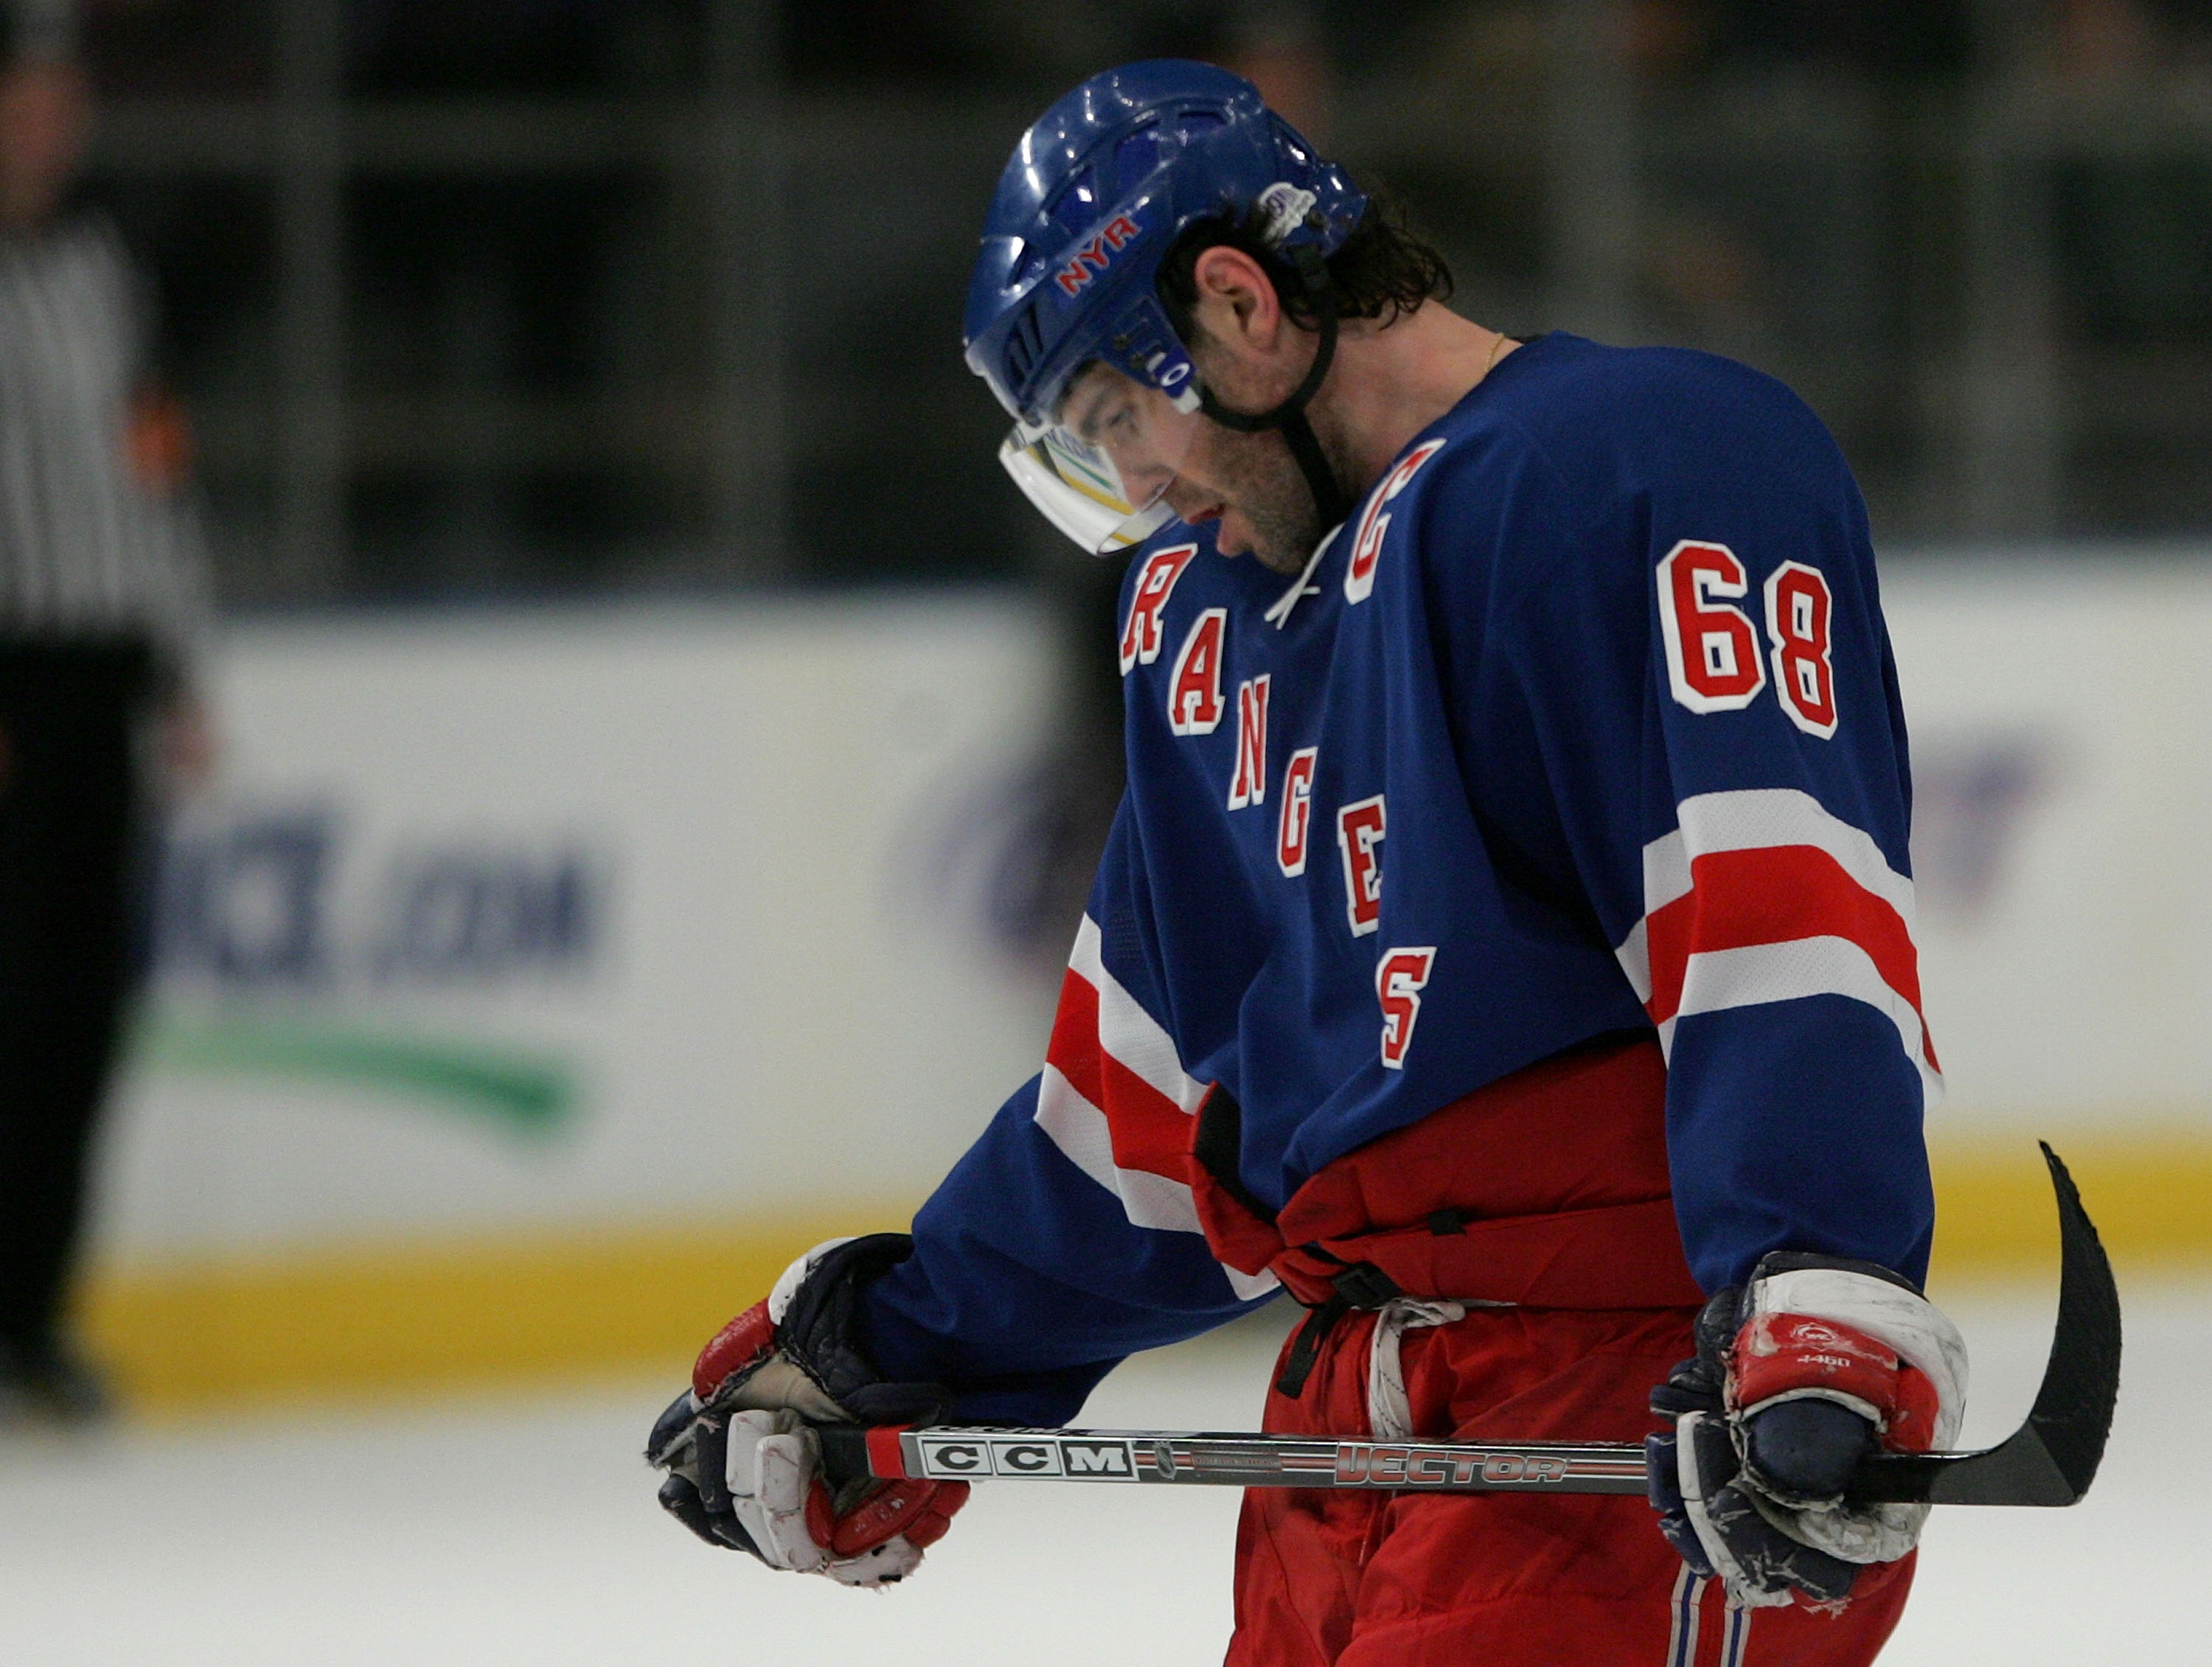 NEW YORK - MAY 06:  Jaromir Jagar #68 of the New York Rangers skates off the ice after loosing to the Buffalo Sabres 5-4 in Game Six of the 2007 Eastern Conference Semifinals on May 6, 2007 at Madison Square Garden in New York City.  (Photo by Bruce Benne